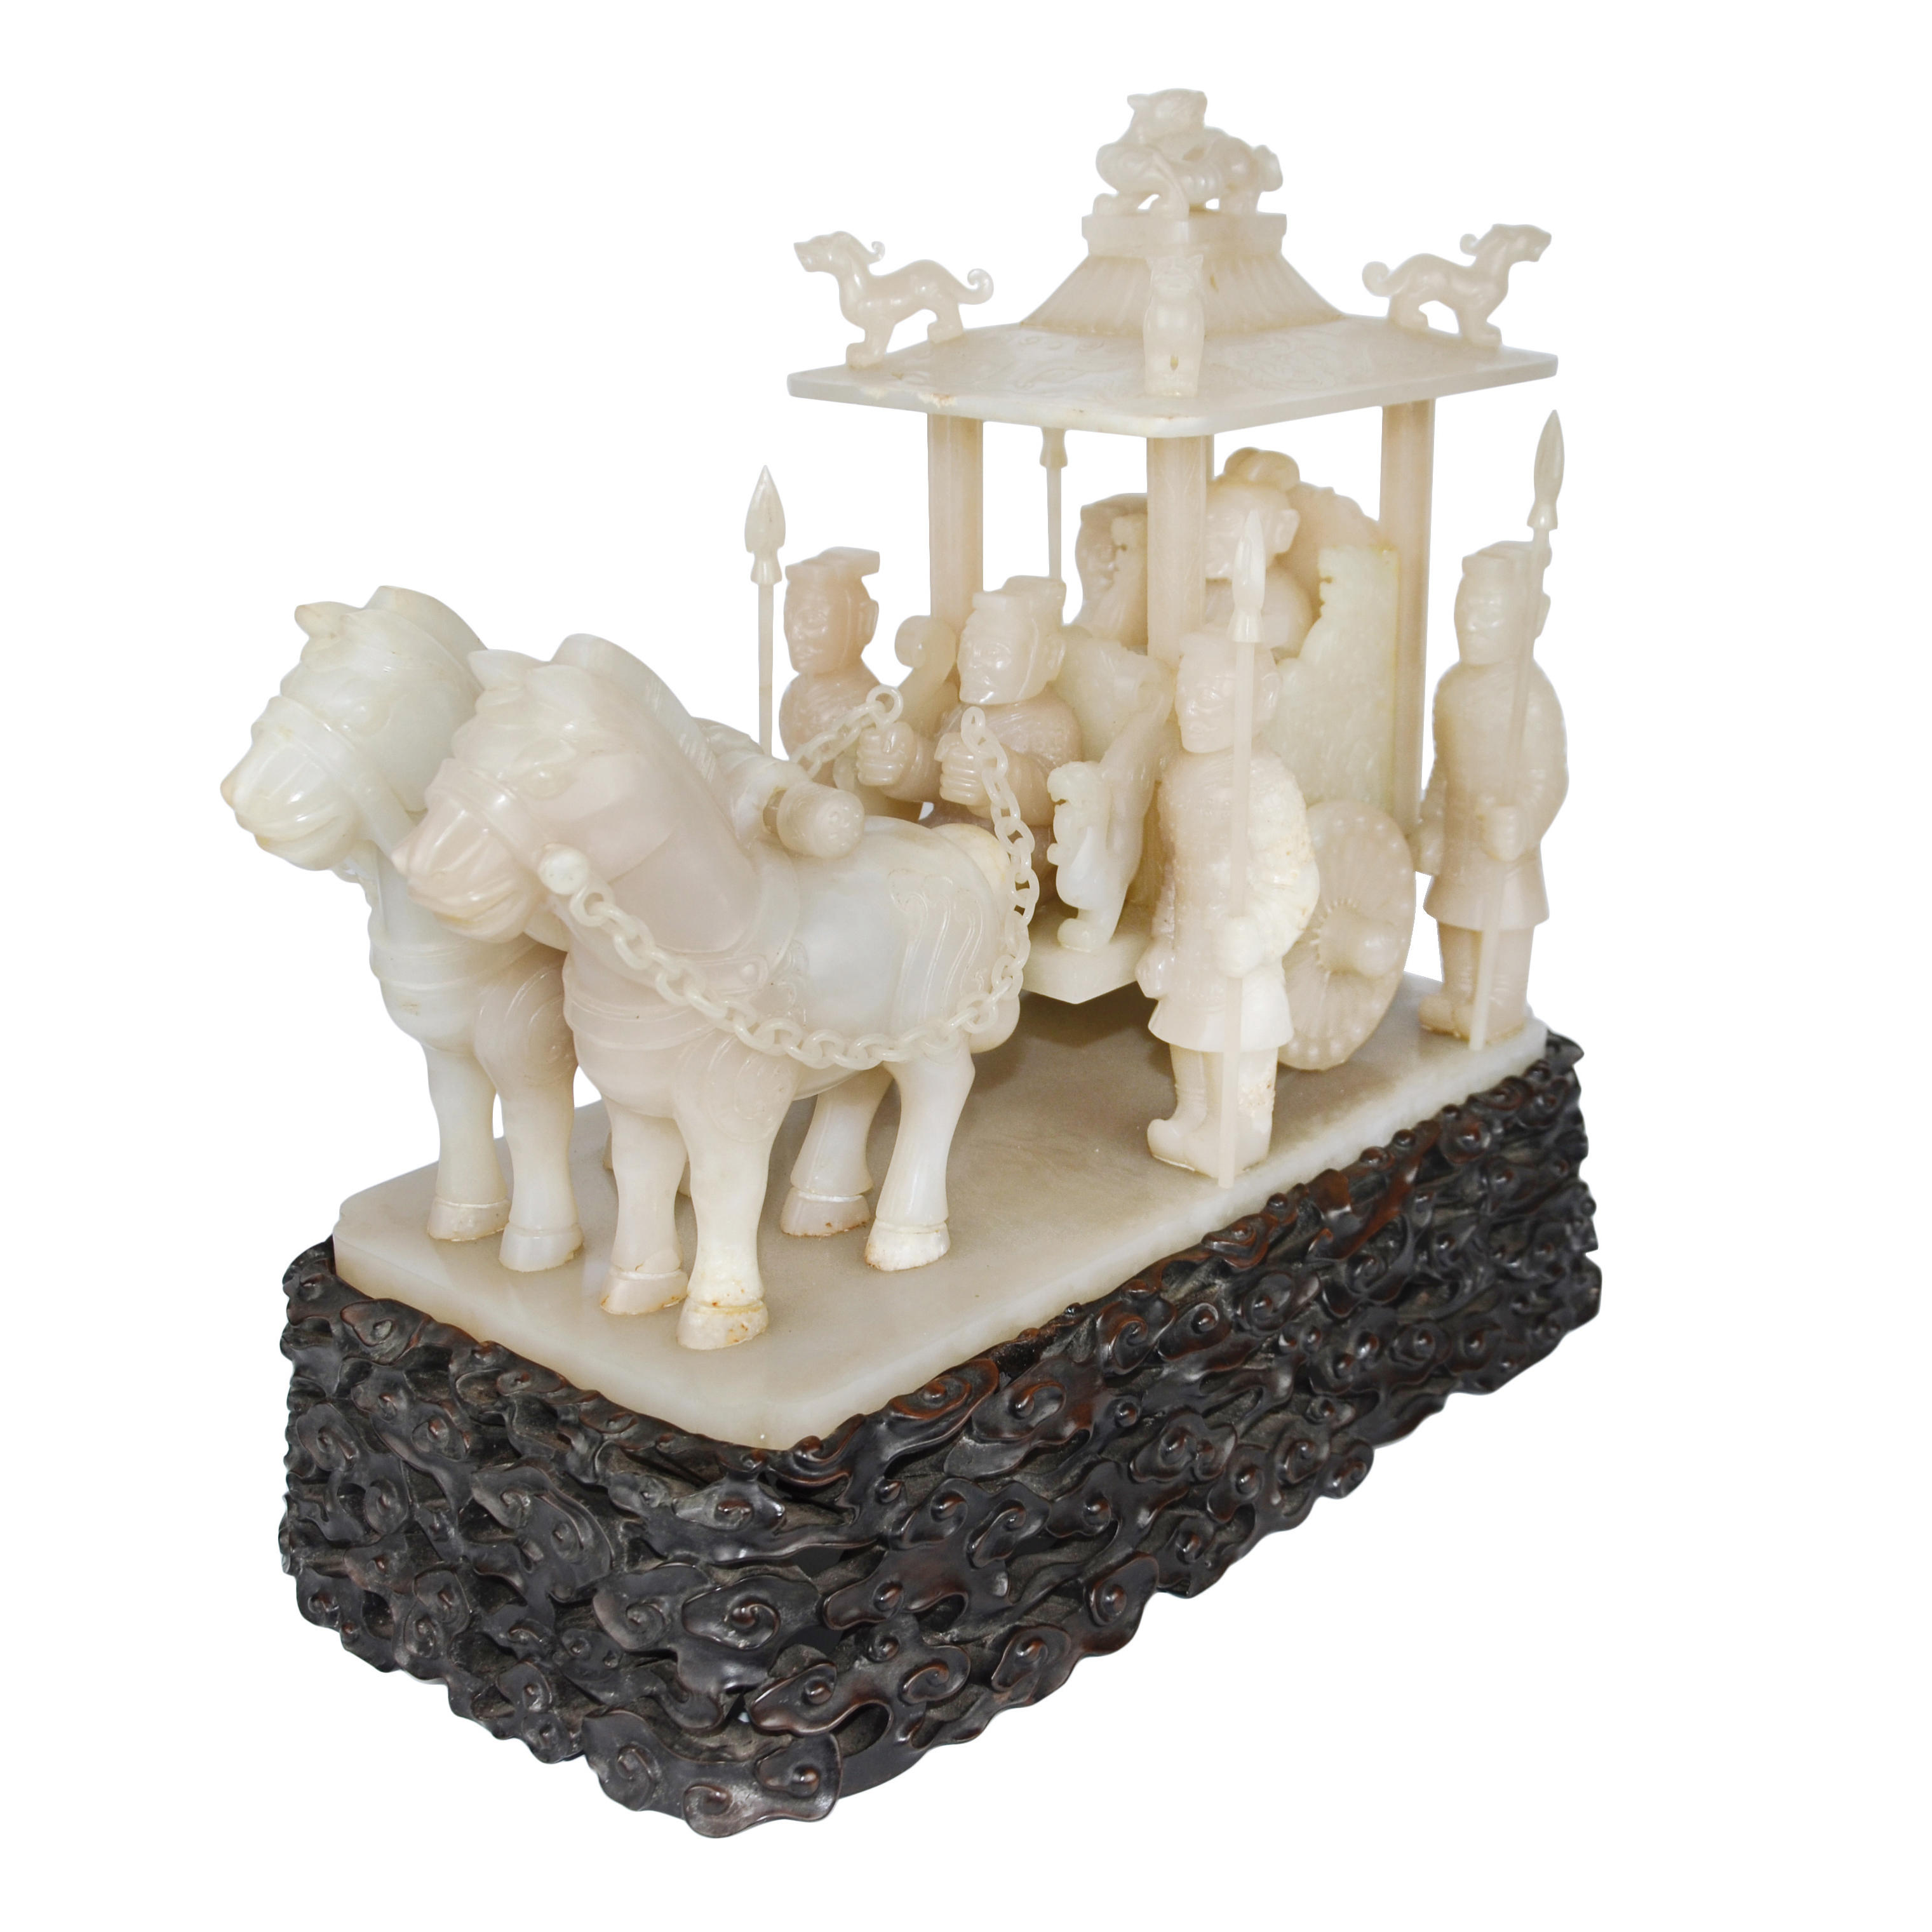 Homage To The Emperor's Chariot Carved in White Jade. Lot 133. Gianguan Auctions March 10 sale.